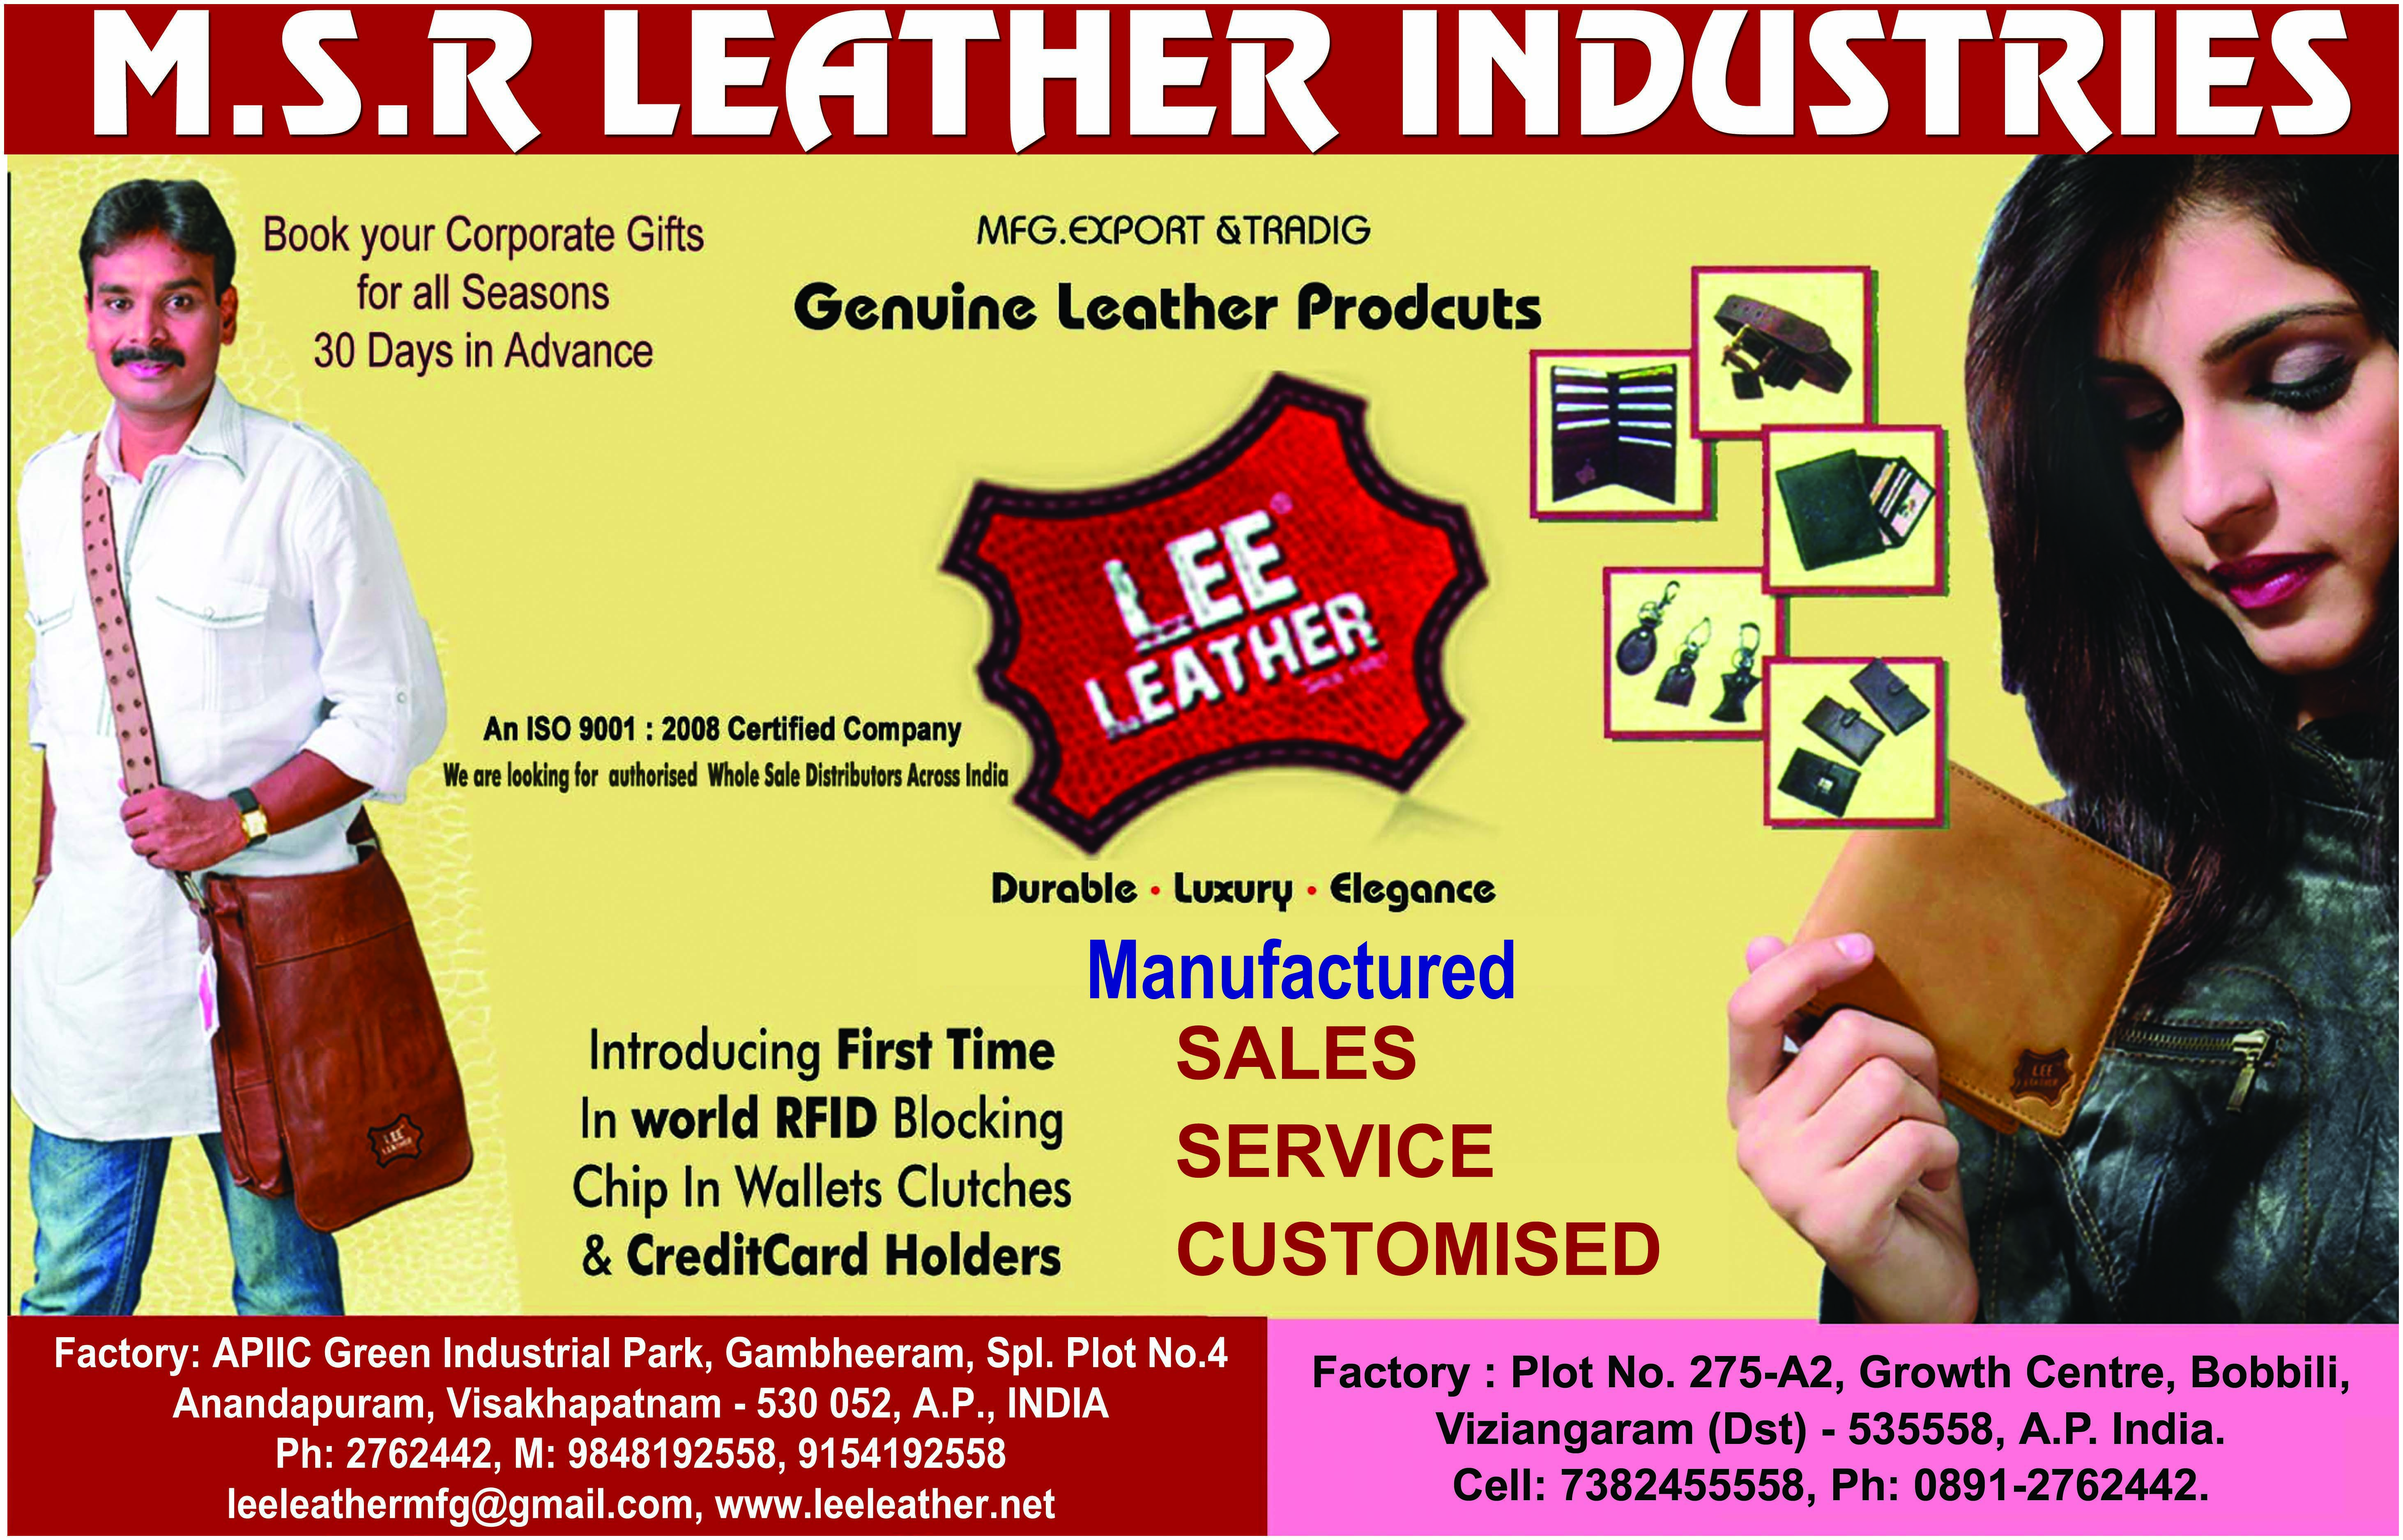 M.S.R.LEE LEATHER INDUSTRIES